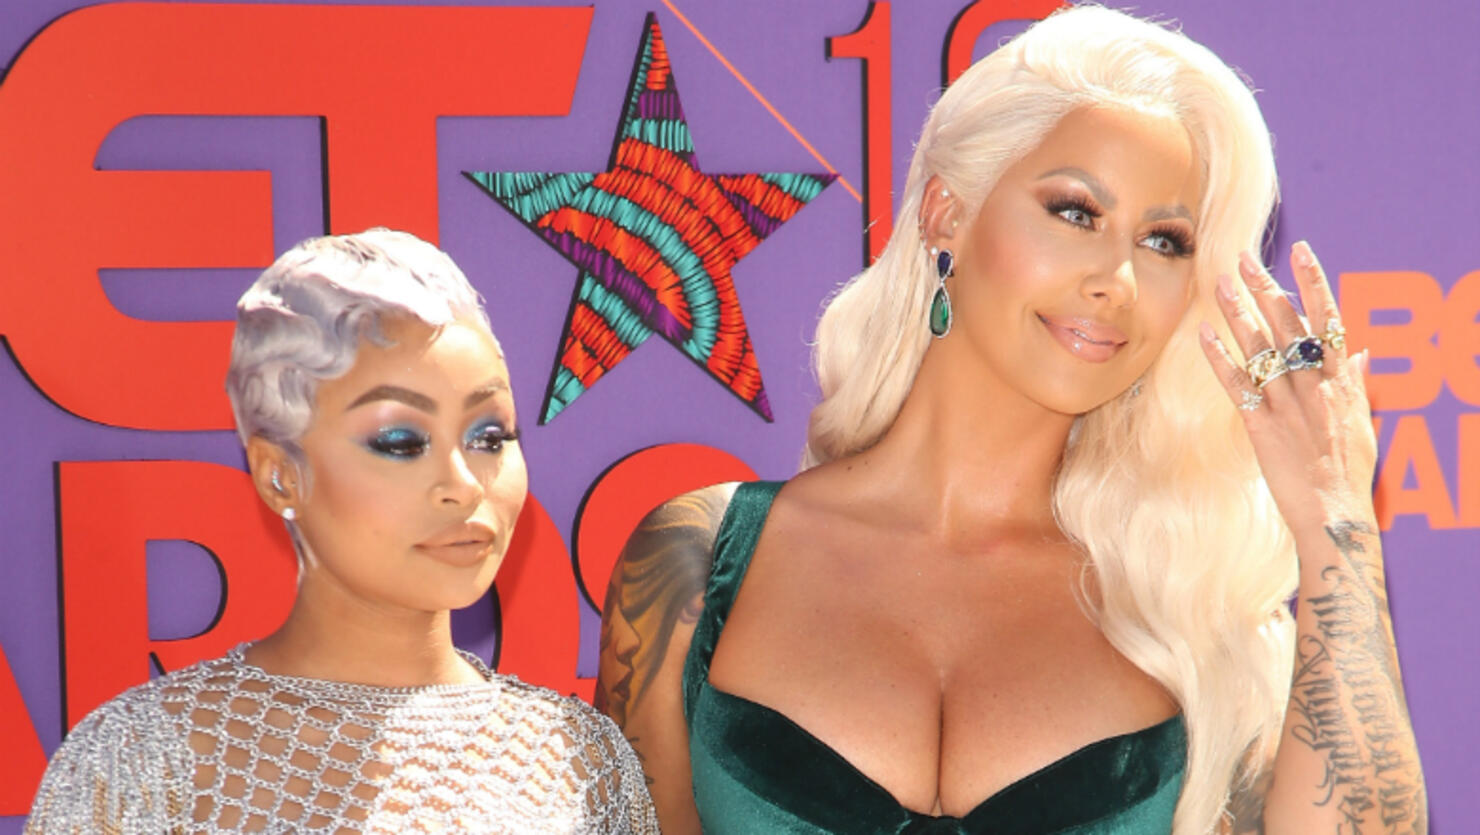 Amber Rose and Blac Chyna disclose the initiator of their reconciliation